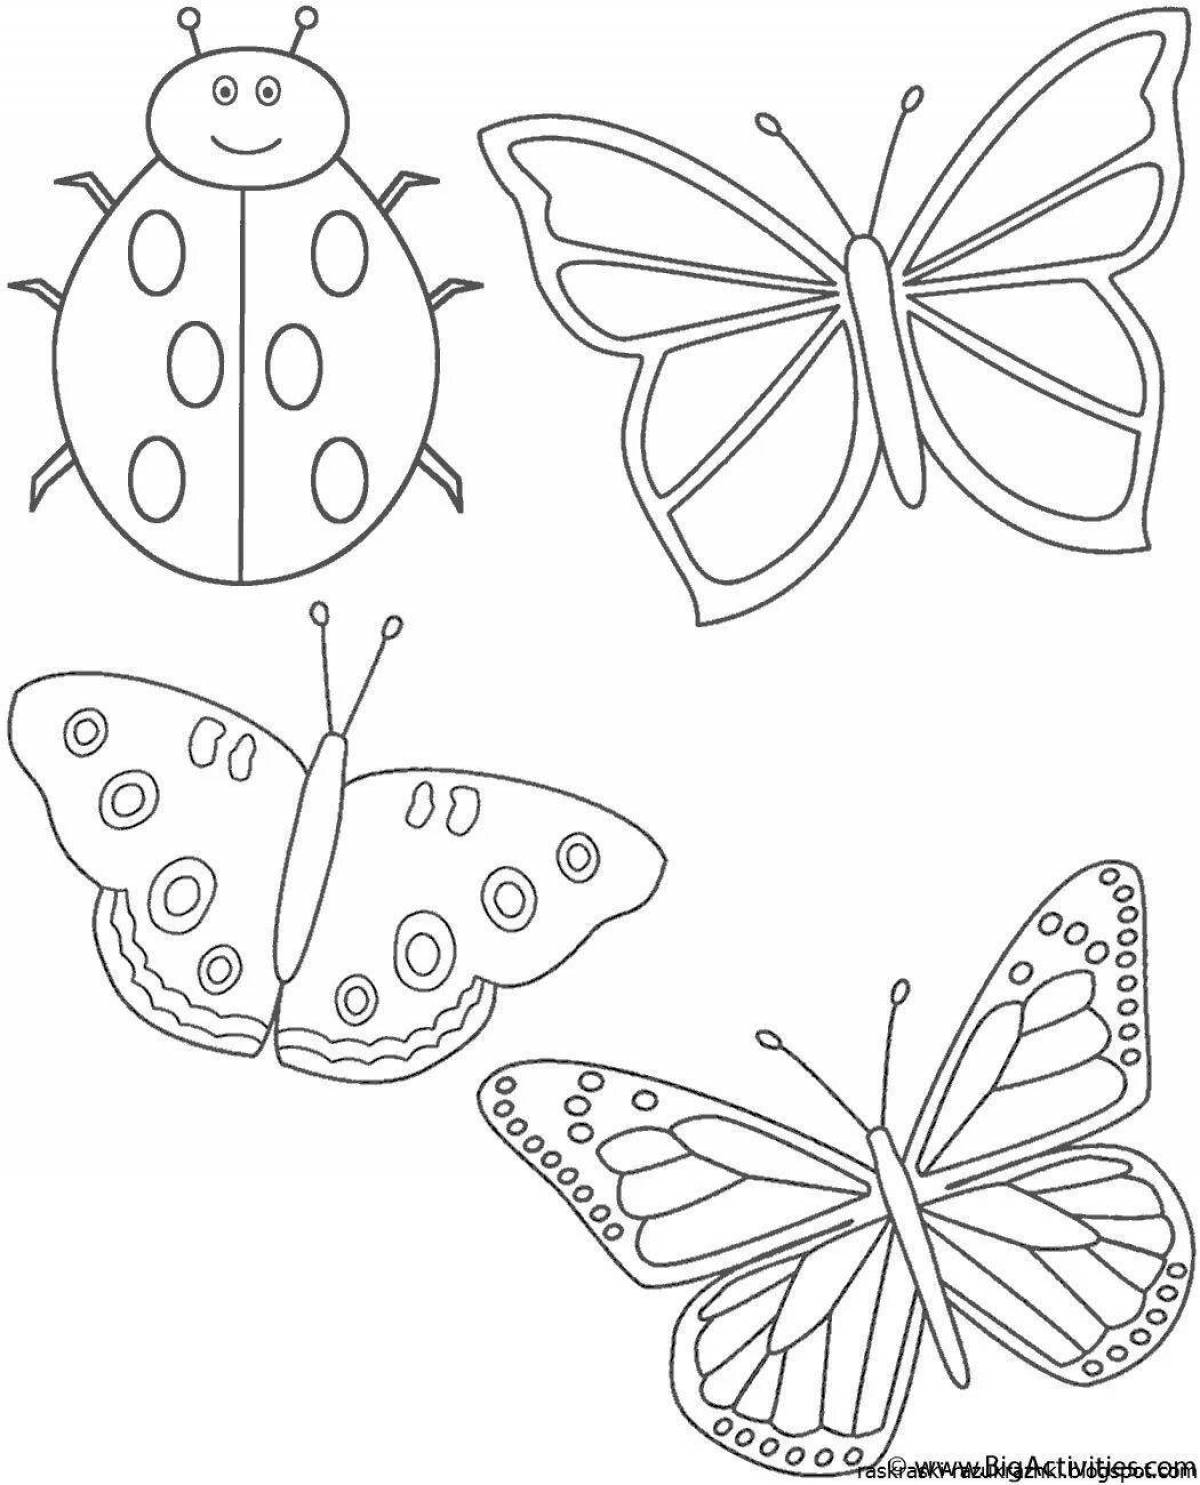 Coloring pages with magical insects for children 6-7 years old